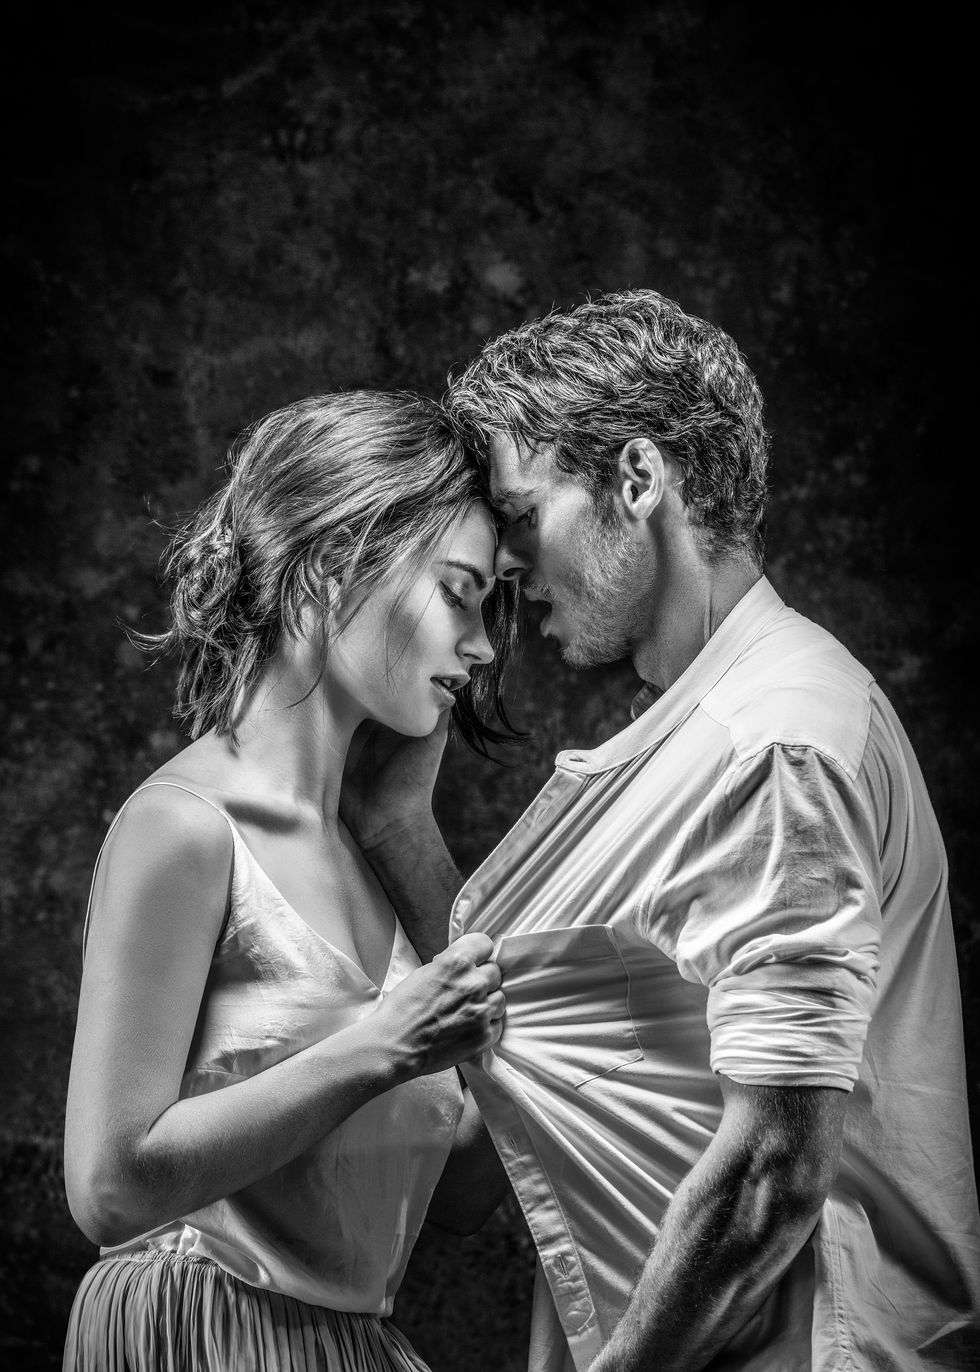 Romeo and Juliet starring Richard Madden and Lily James